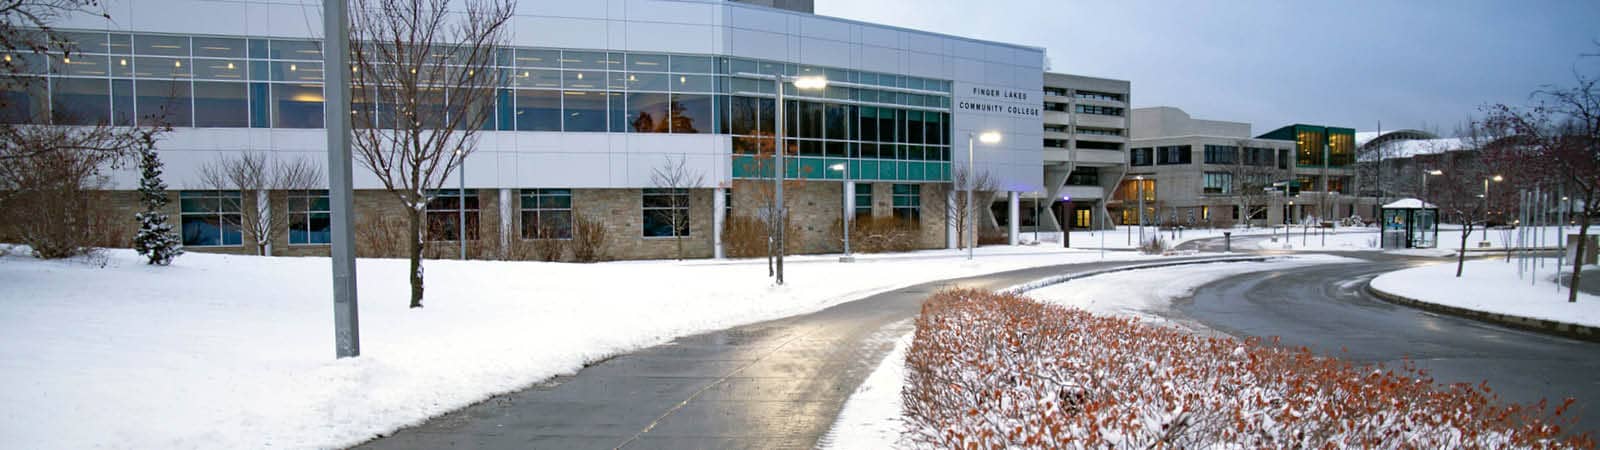 FLCC Main Building at the Canandaigua Campus after a winter snowfall